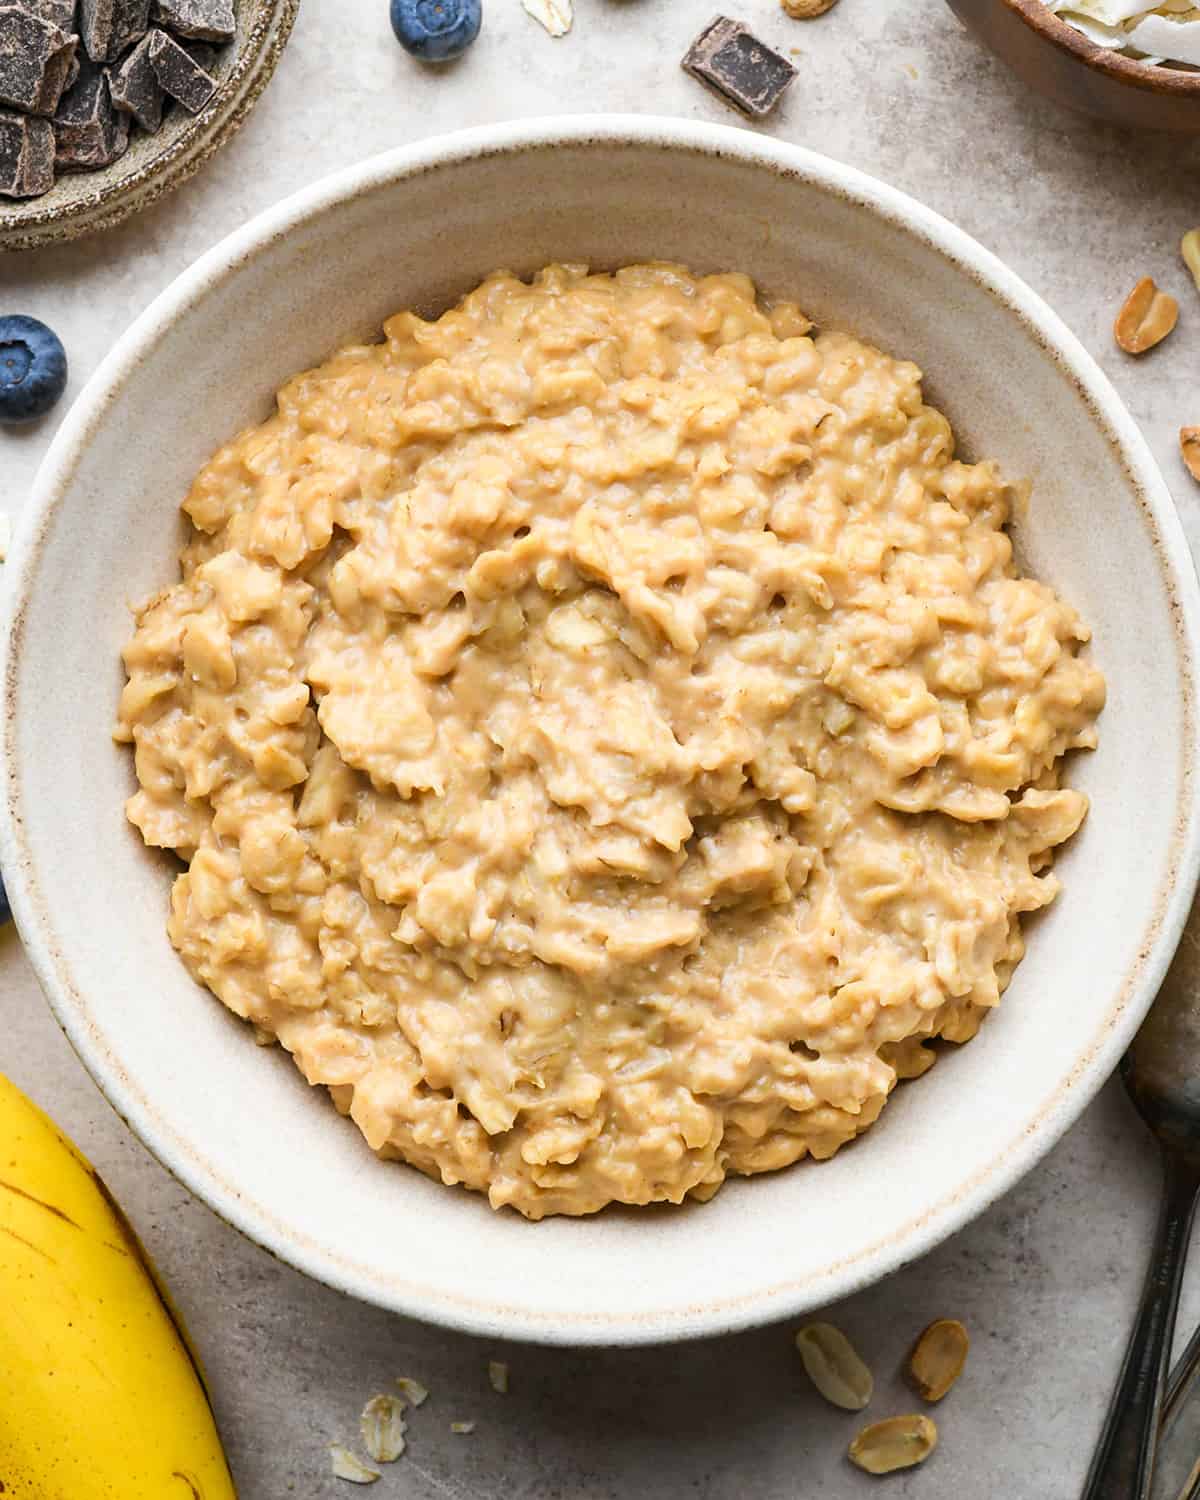 Peanut Butter Oatmeal in a bowl without toppings